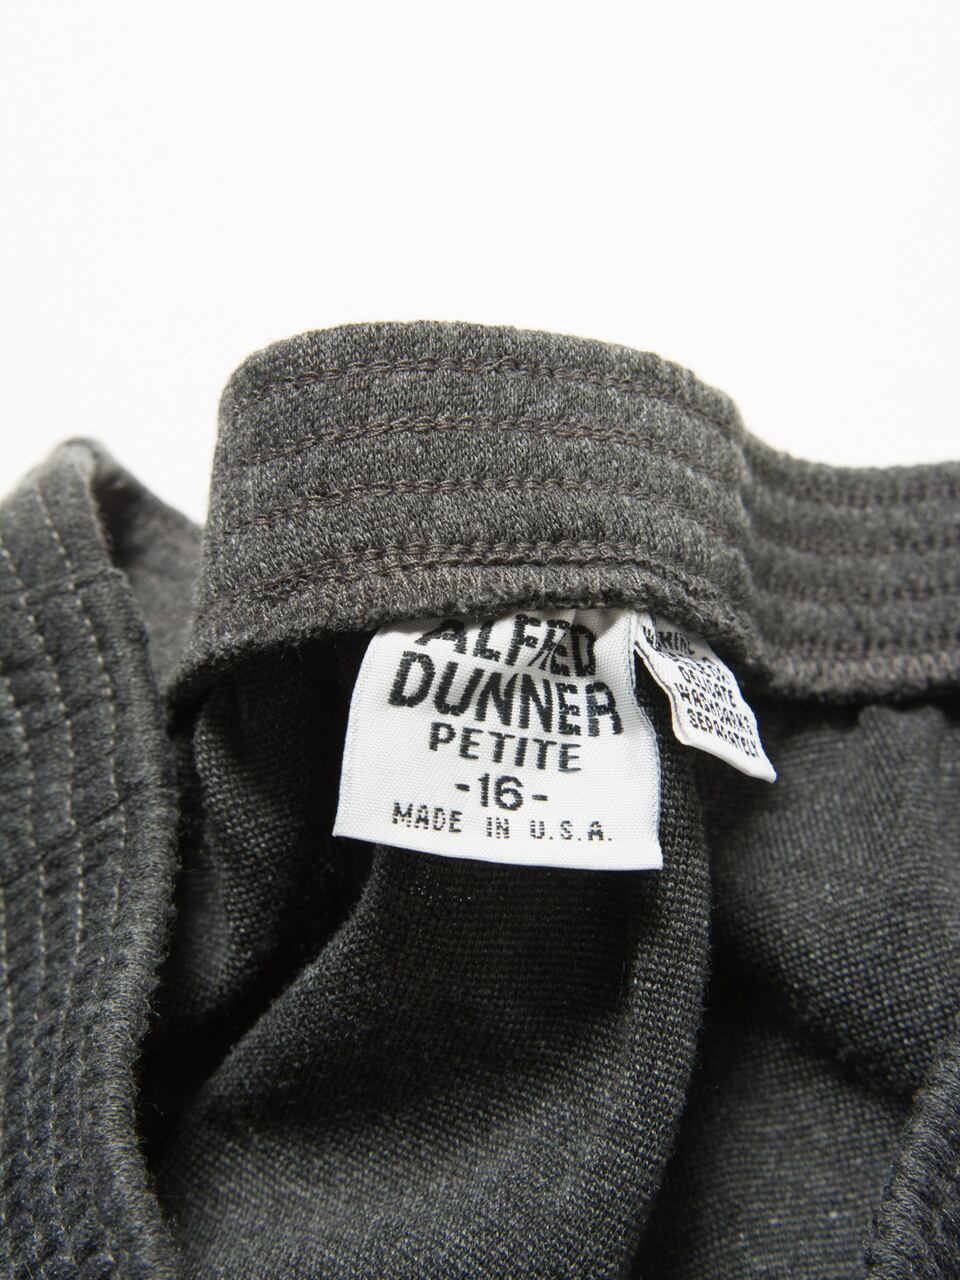 【ALFRED DUNNER】made in USA knit skirt（アメリカ製ニットスカート）9b